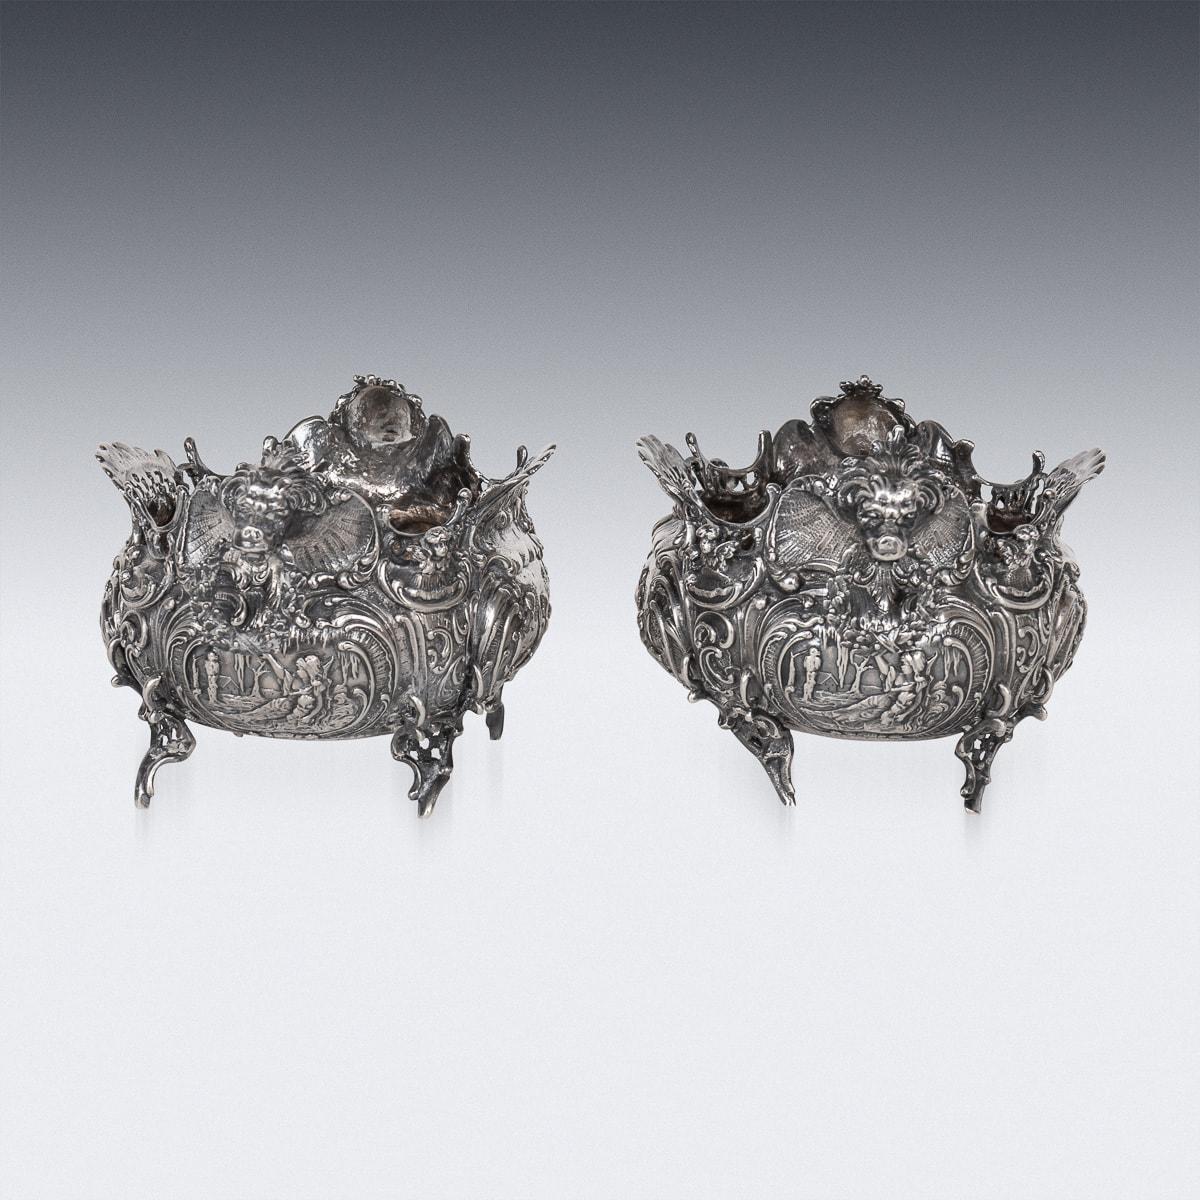 Late 19th Century Antique 19th Century German Solid Silver Bowls, Georg Roth, Hanau c.1890 For Sale